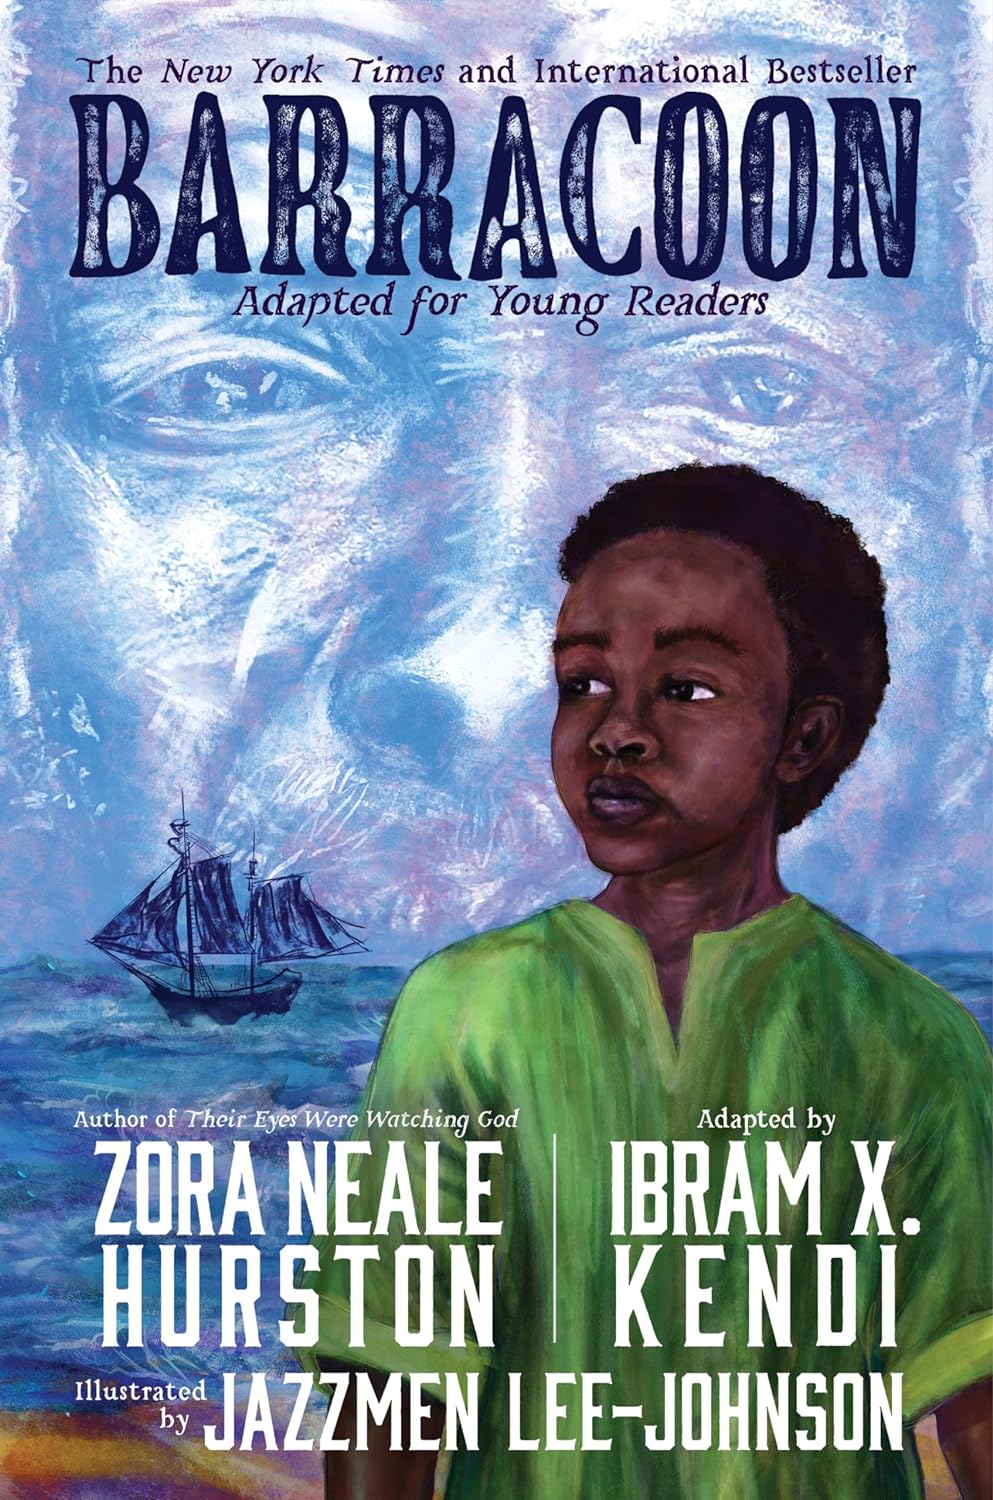 One of our recommended books is Barracoon by Zora Neale Hurston and Ibram X. Kendi